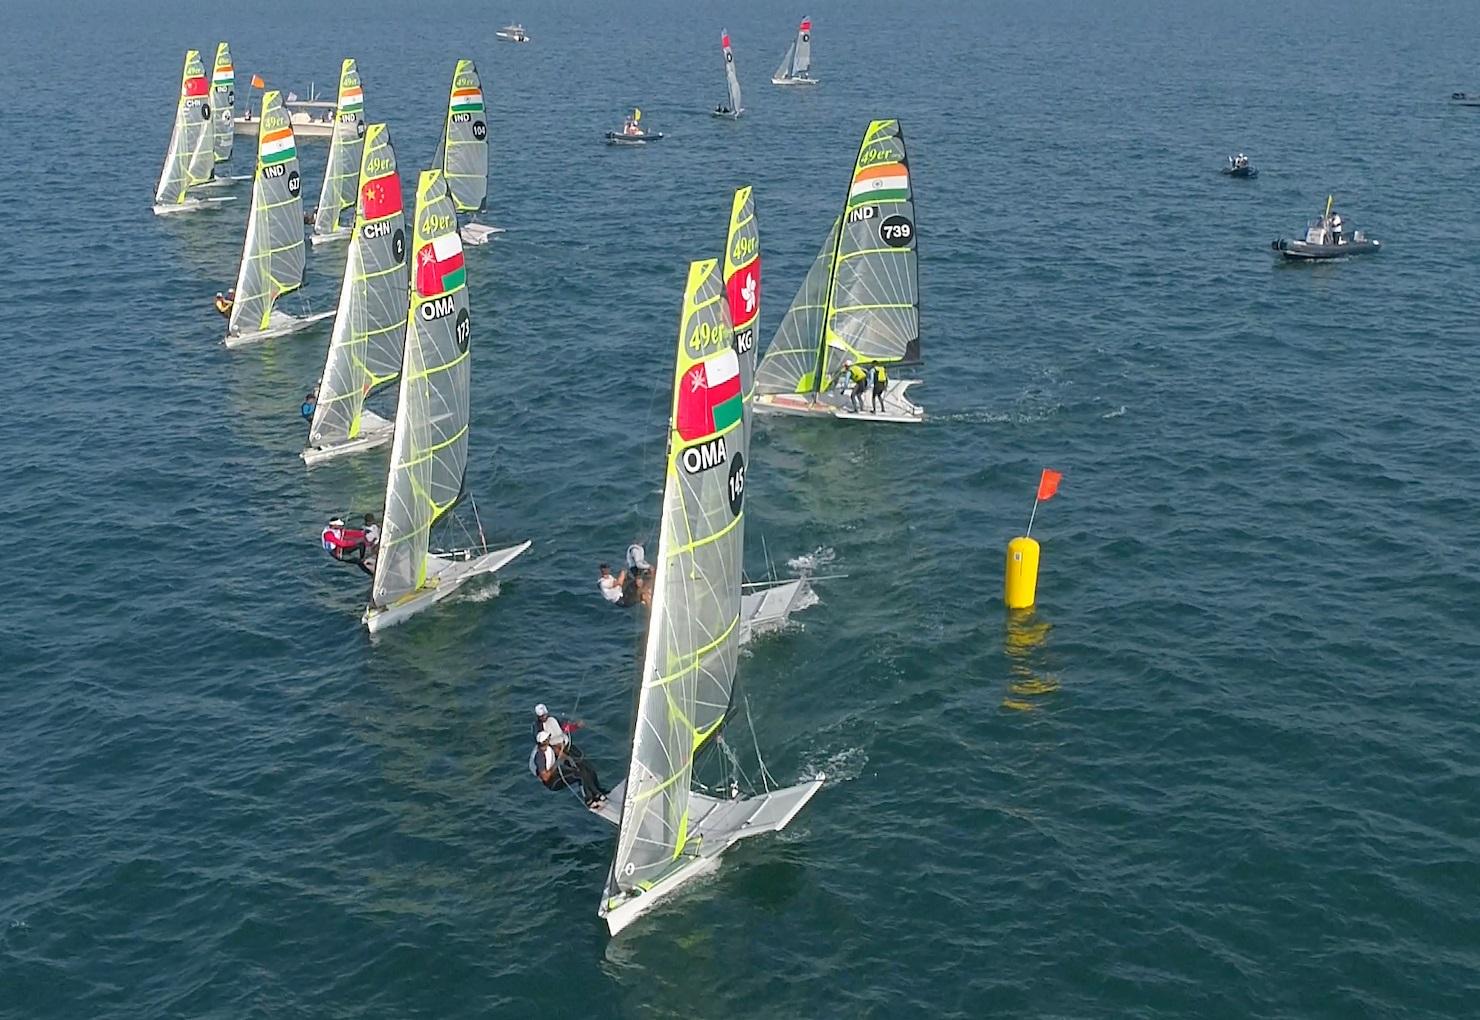 Oman Sail to host the 2021 49er, 49erFX, and Nacra 17 World Championships